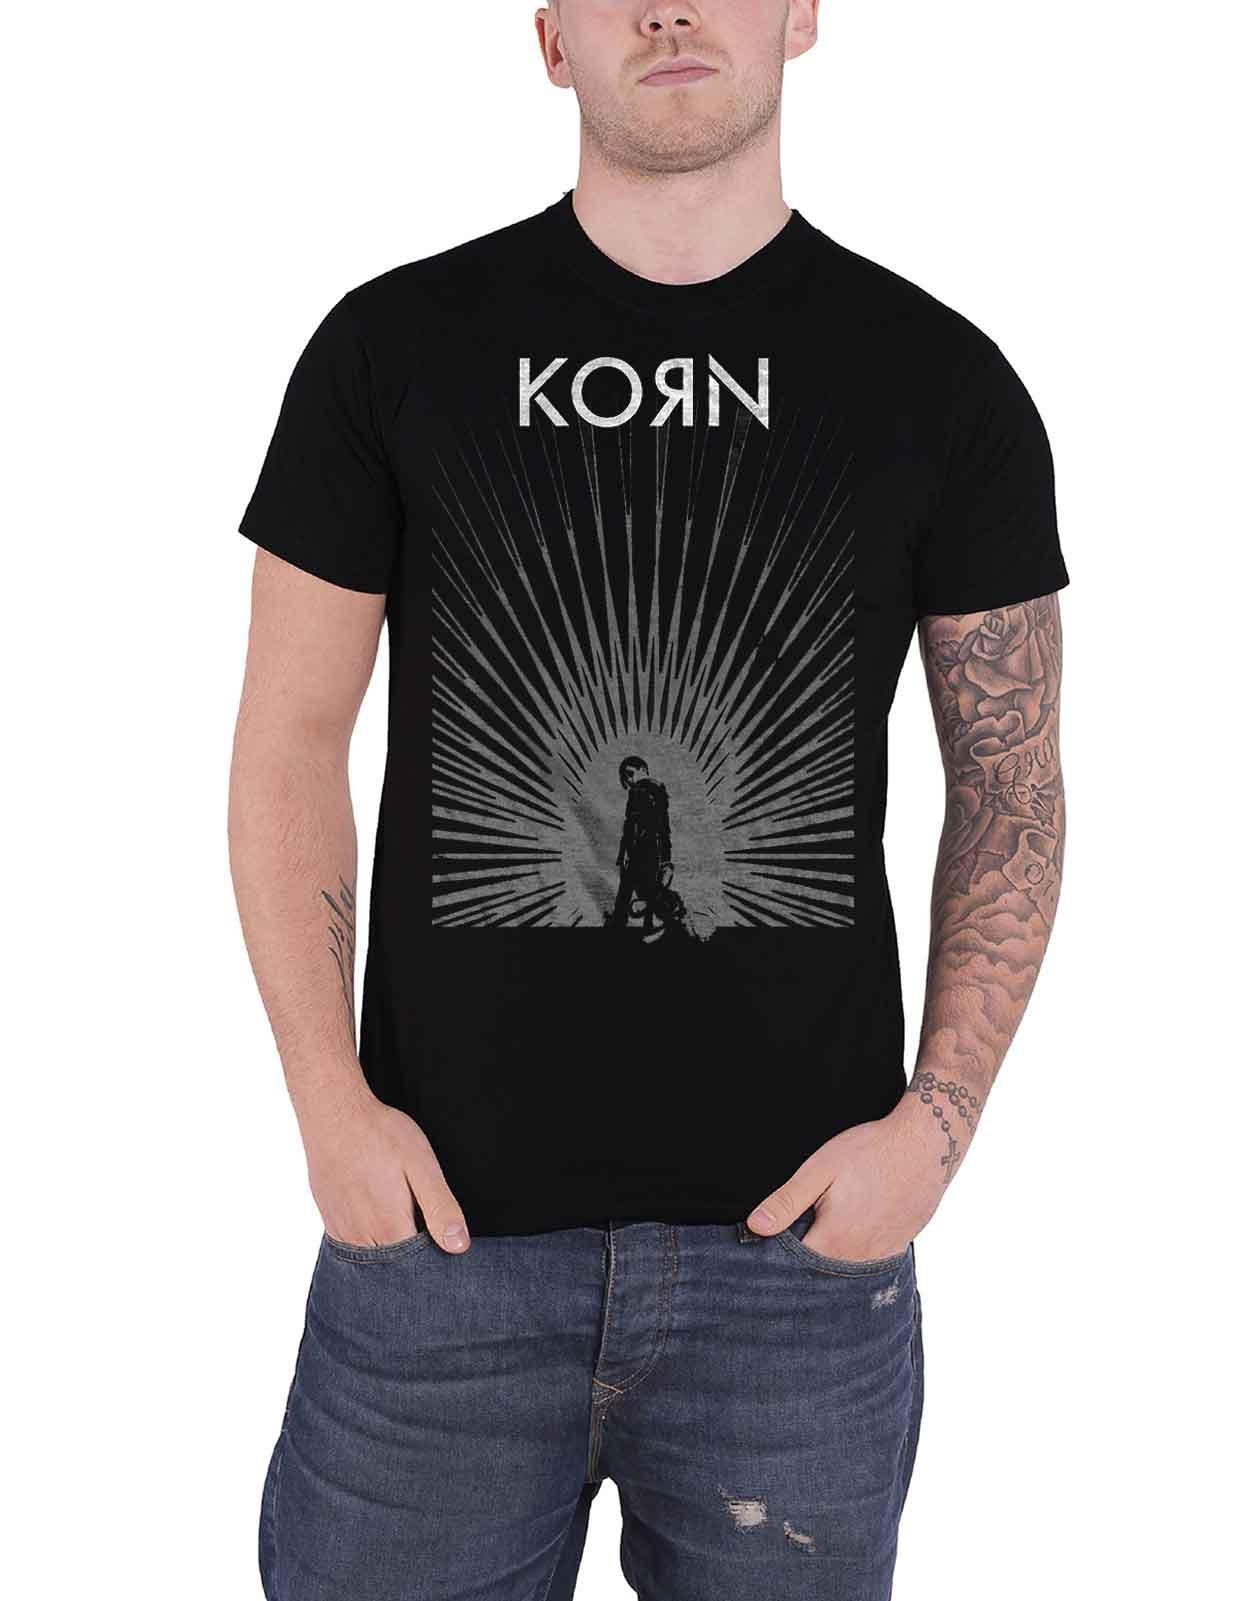 korn the serenity of suffering Футболка Serenity Of Suffering Radiate Glow Korn, черный